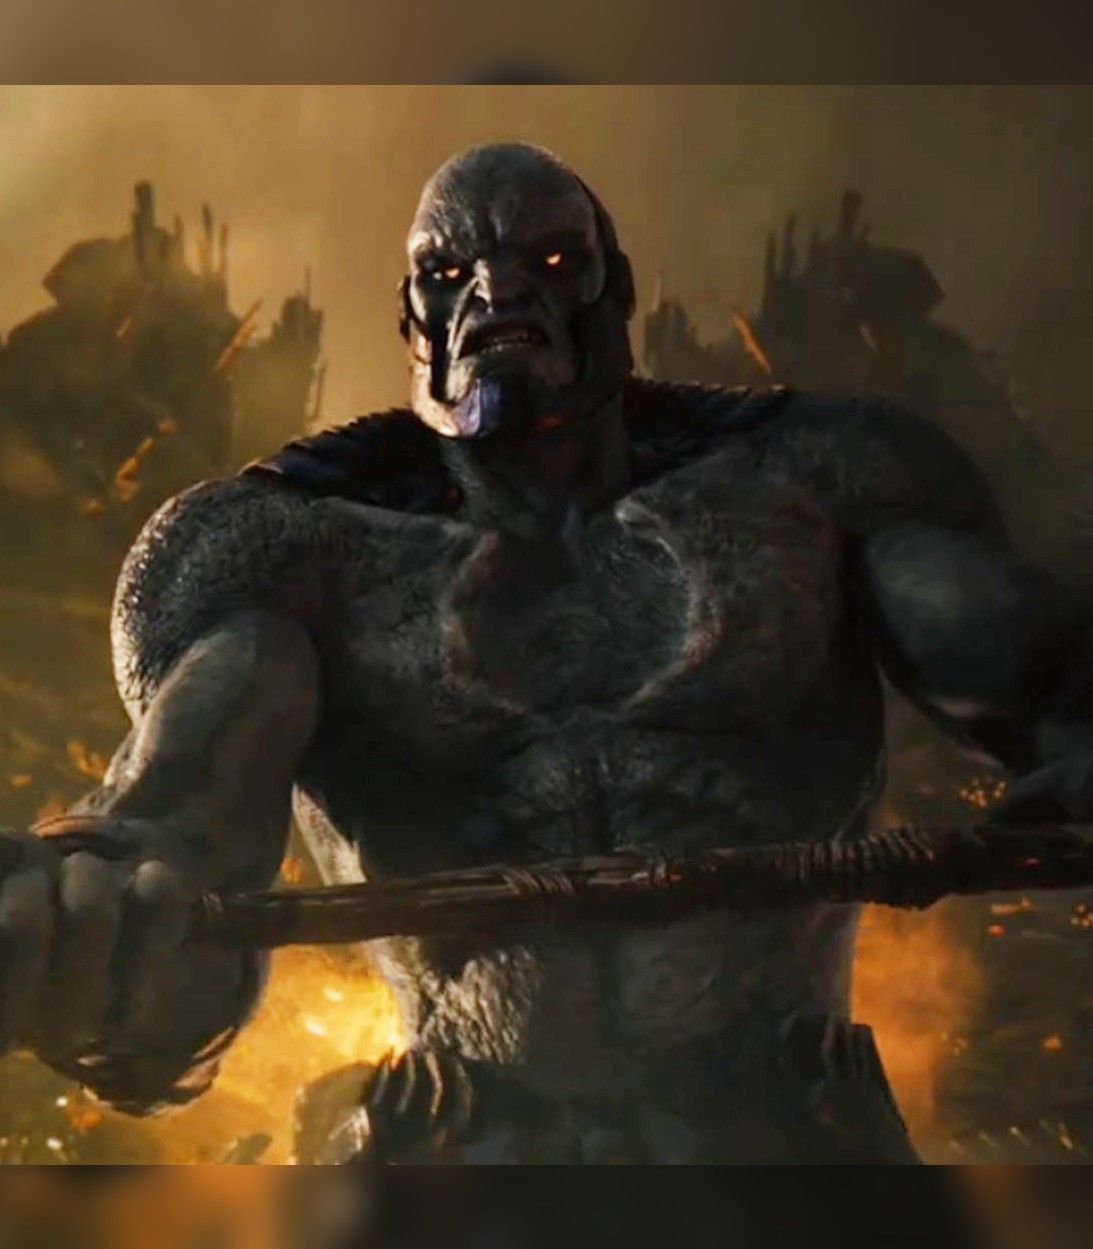 Darkseid from Zack Snyder's Justice League